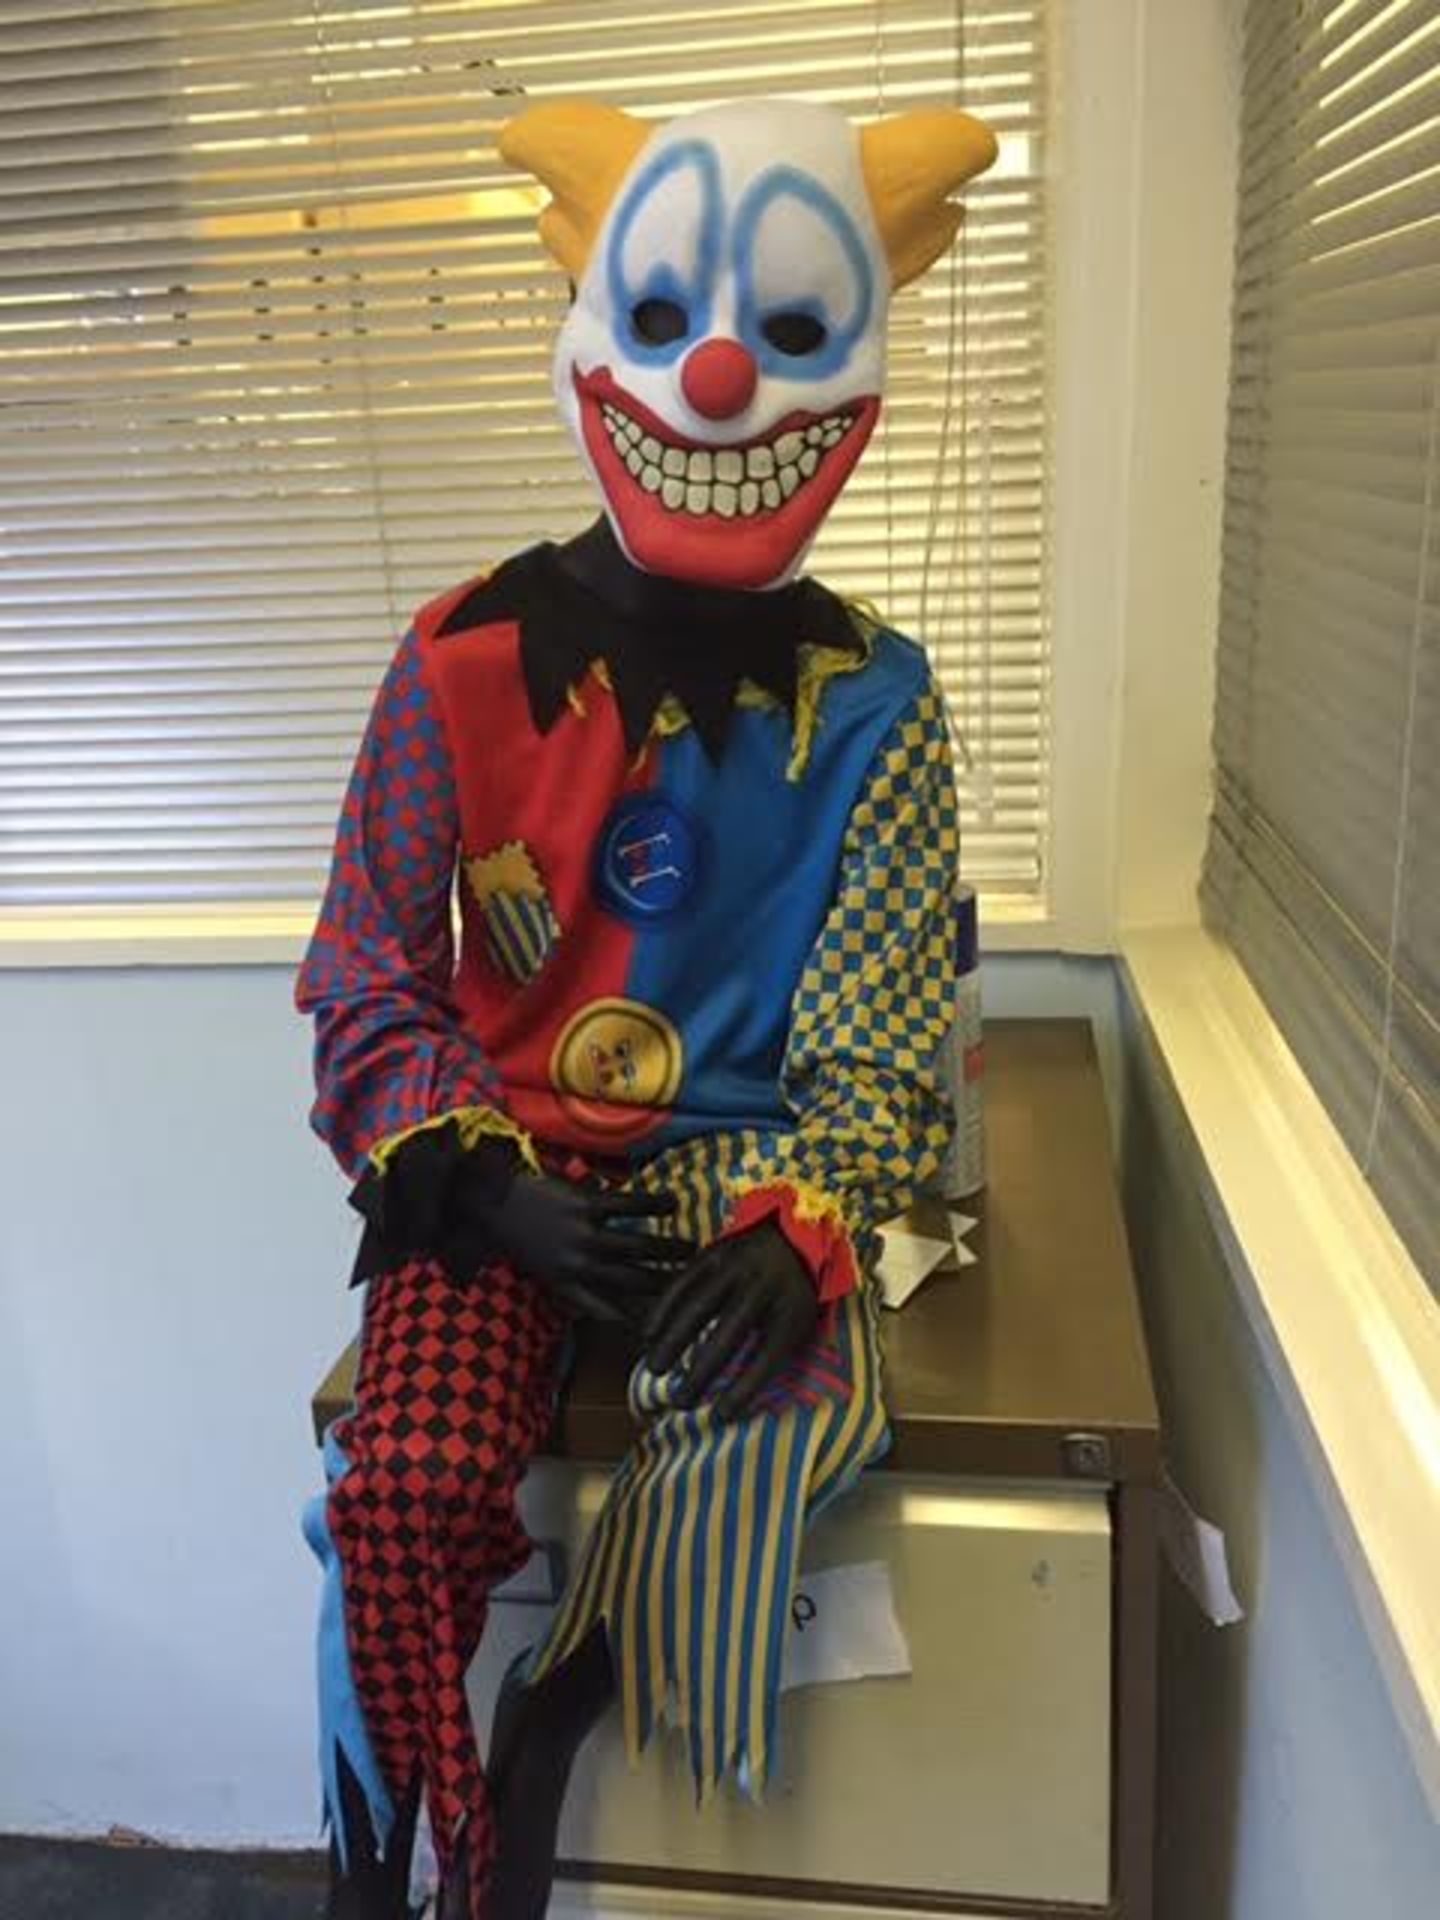 10 x Halloween SCARY CLOWN Dressing Up Costume - For Those Who Really Want a Spooky Trick or Treat - Image 2 of 3